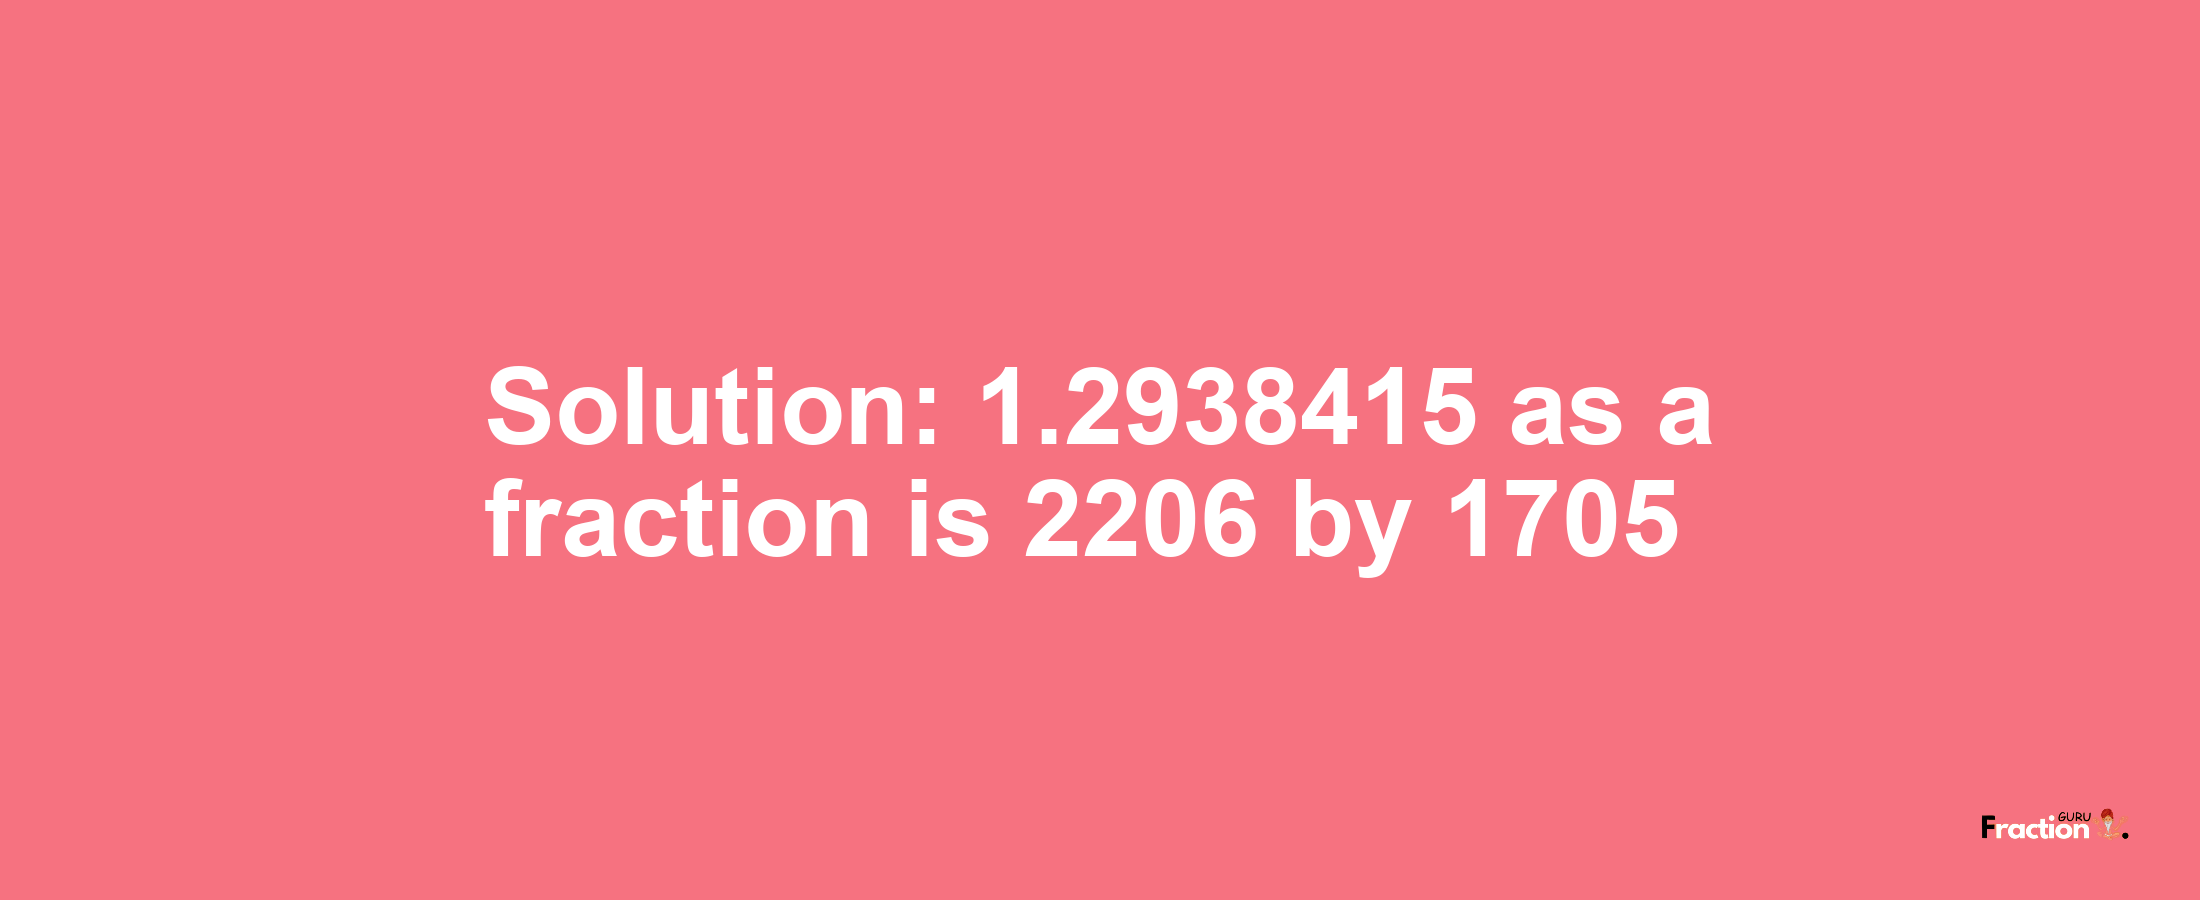 Solution:1.2938415 as a fraction is 2206/1705